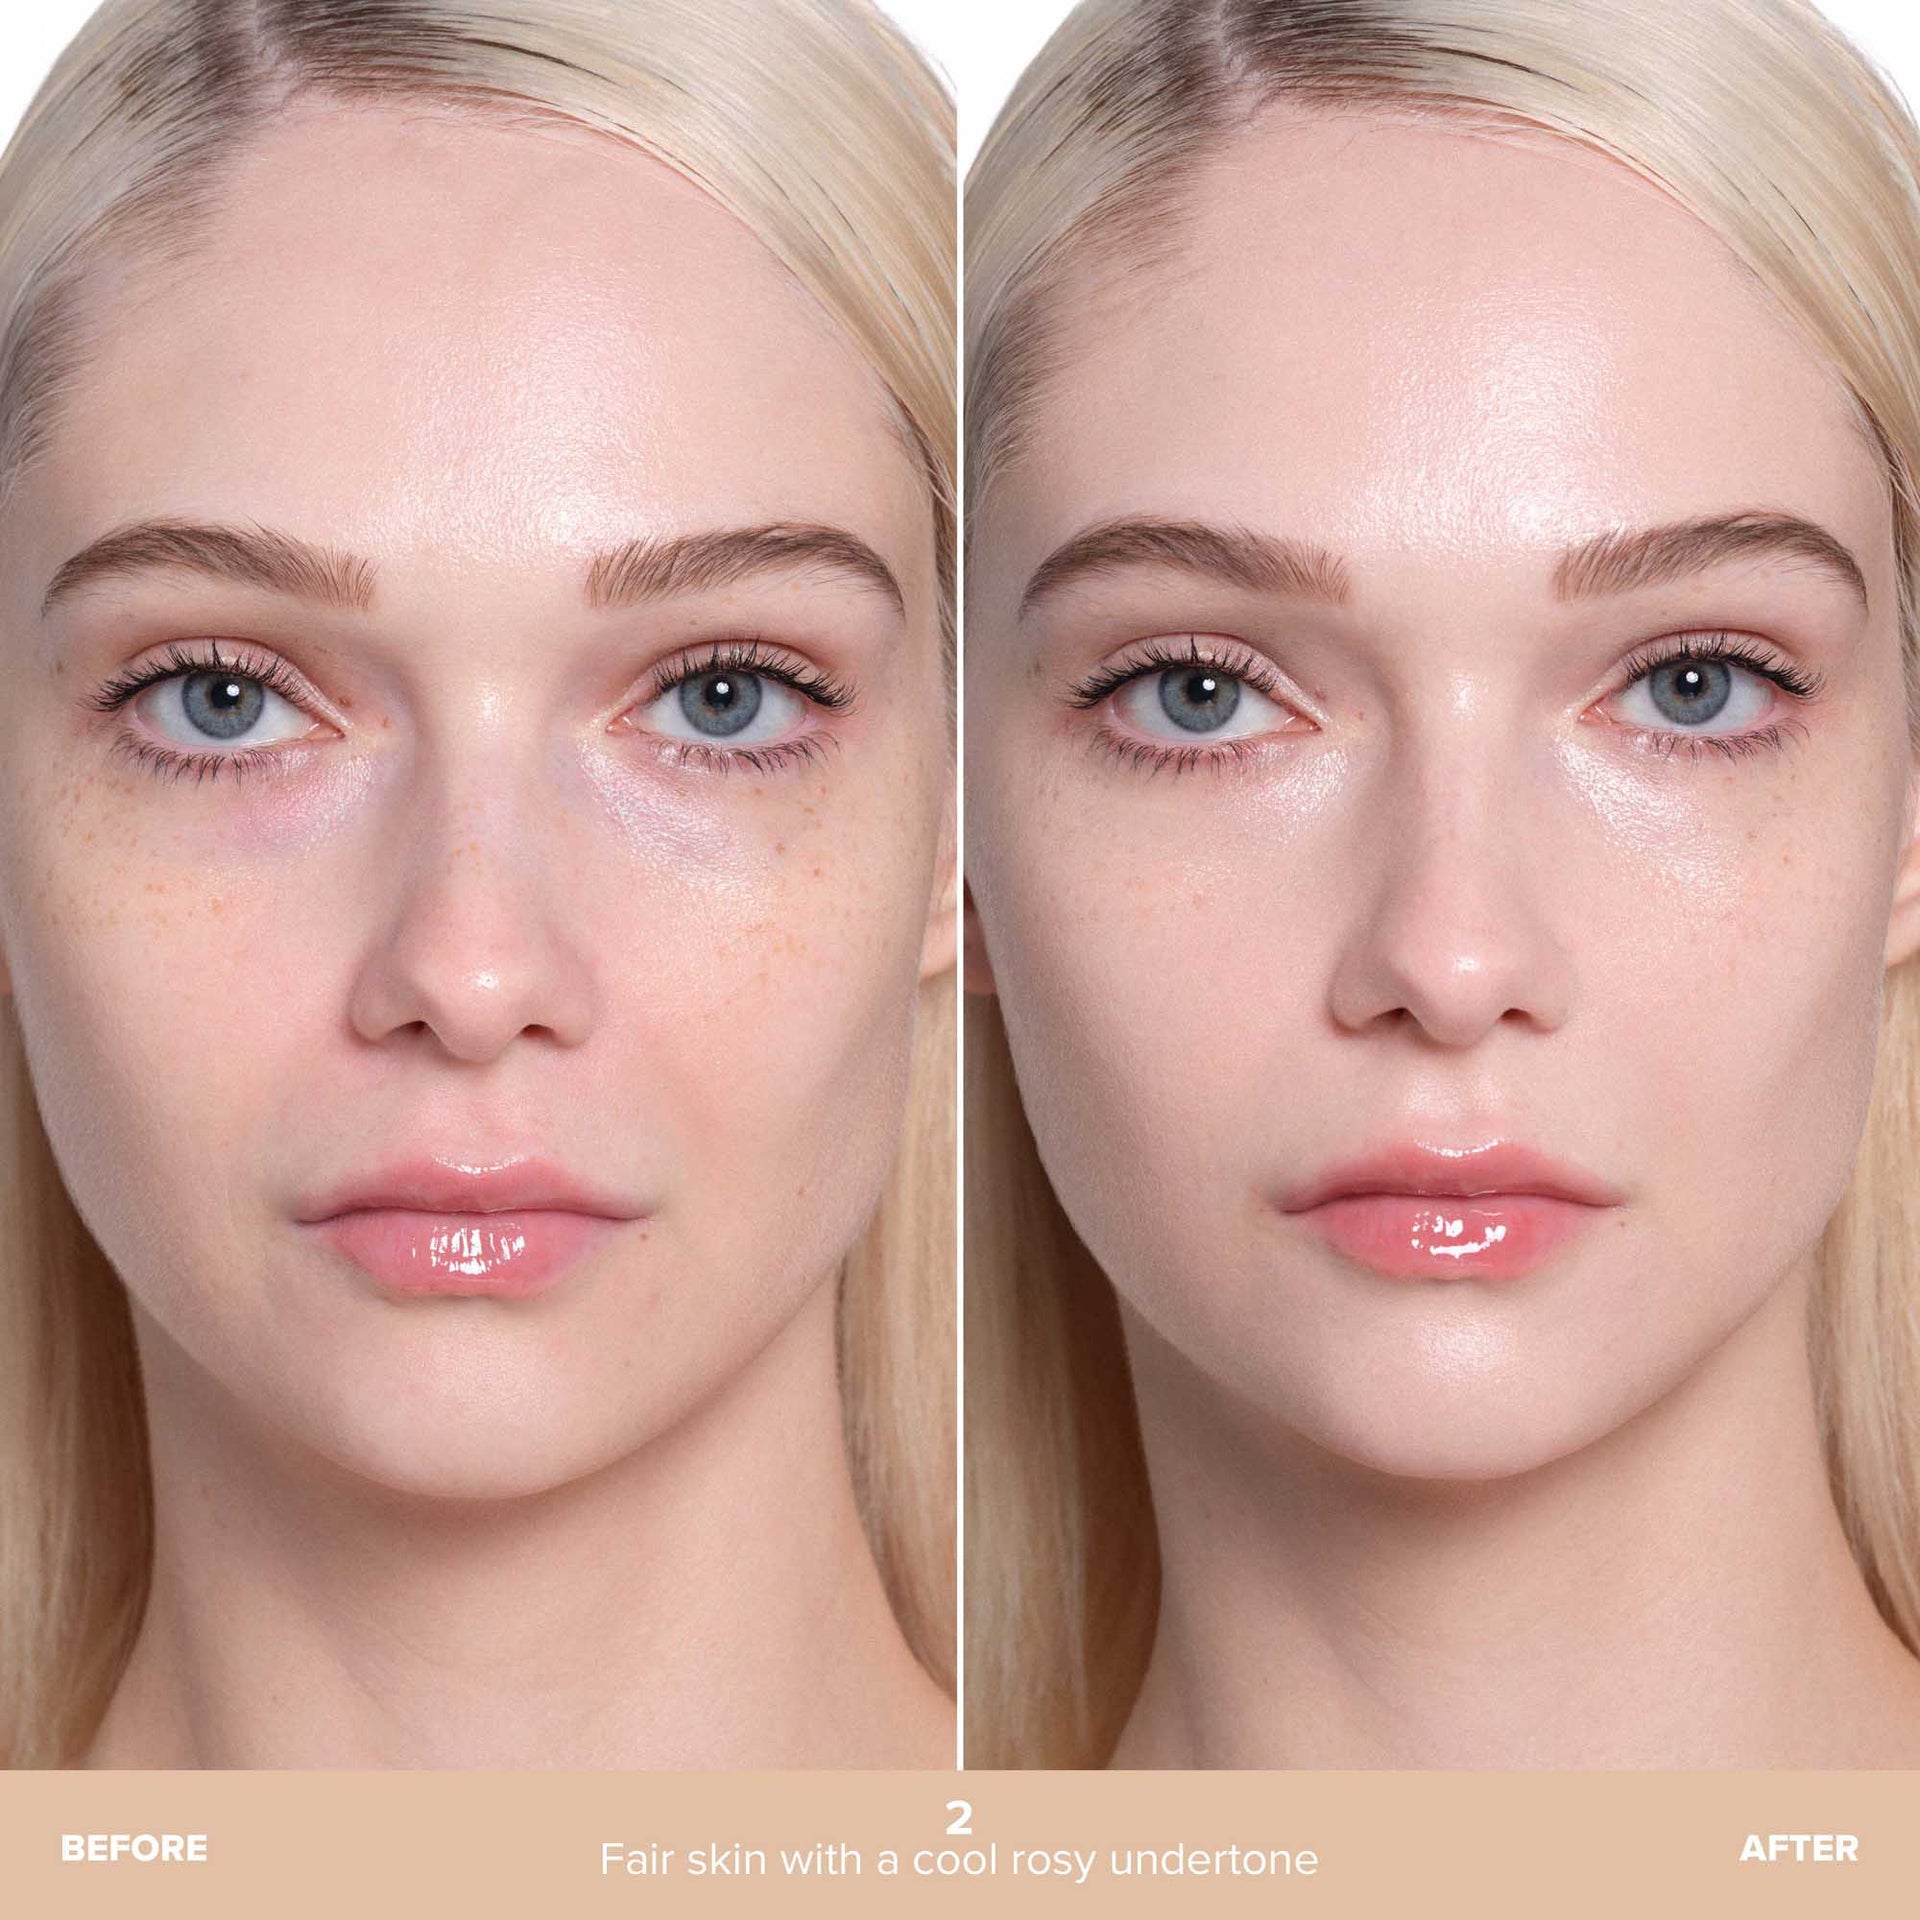 Shade 2 | Beauty Balm Serum Boosted Skin Tint Before & After - Shade 2